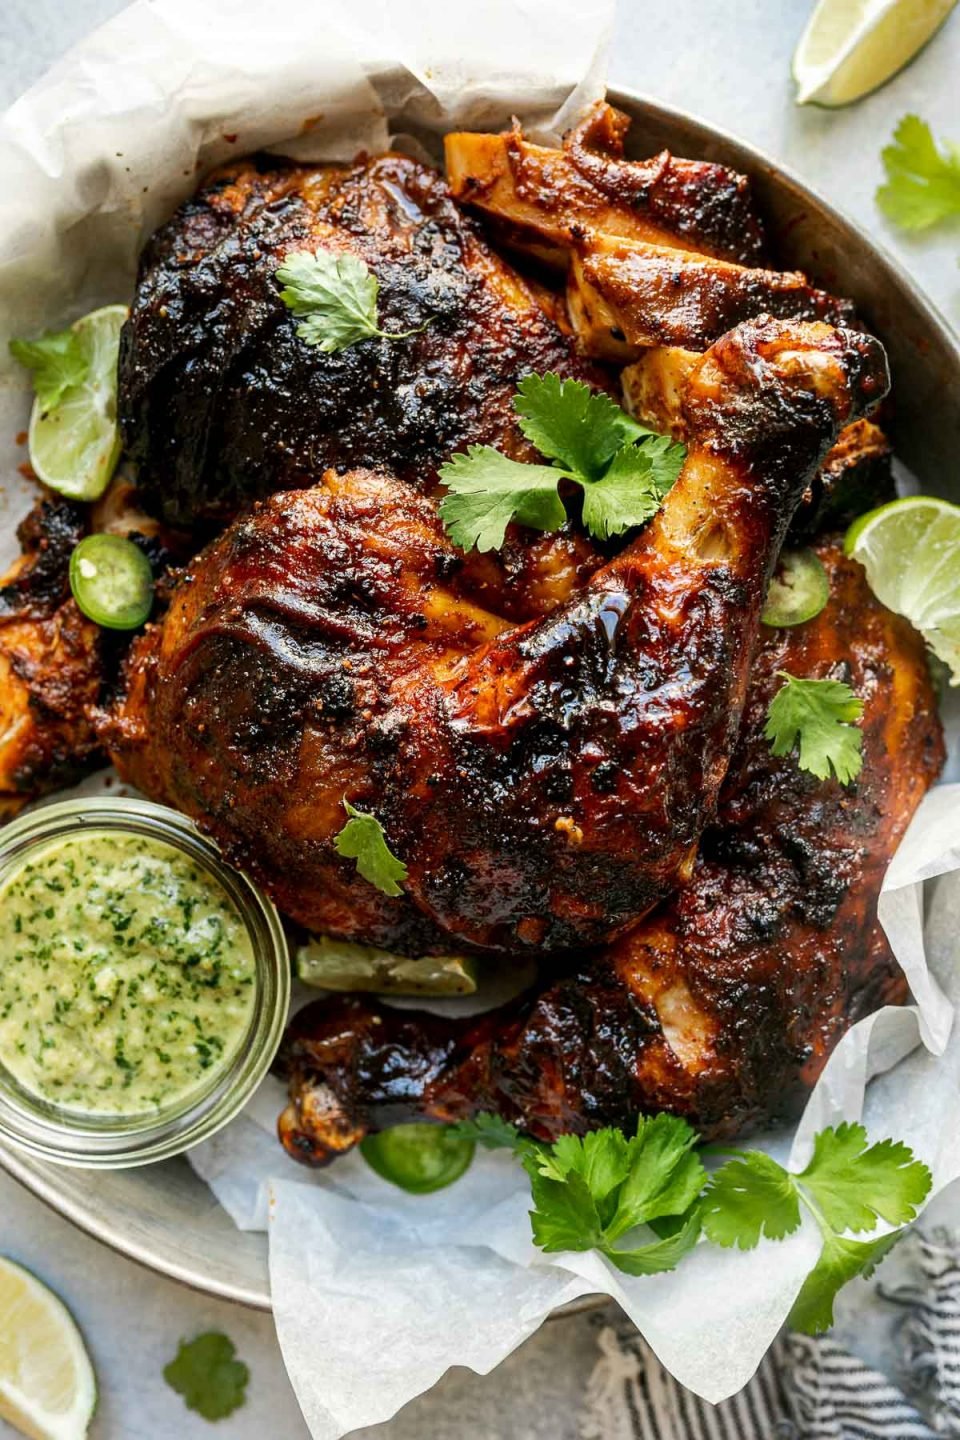 Butchered grilled whole chicken in a tin tray, topped with lime wedges, sliced jalapeno, & cilantro leaves. The tray sits atop a light blue surface, surrounded by fresh lime wedges, cilantro leaves, & a dark gray & white striped linen napkin.